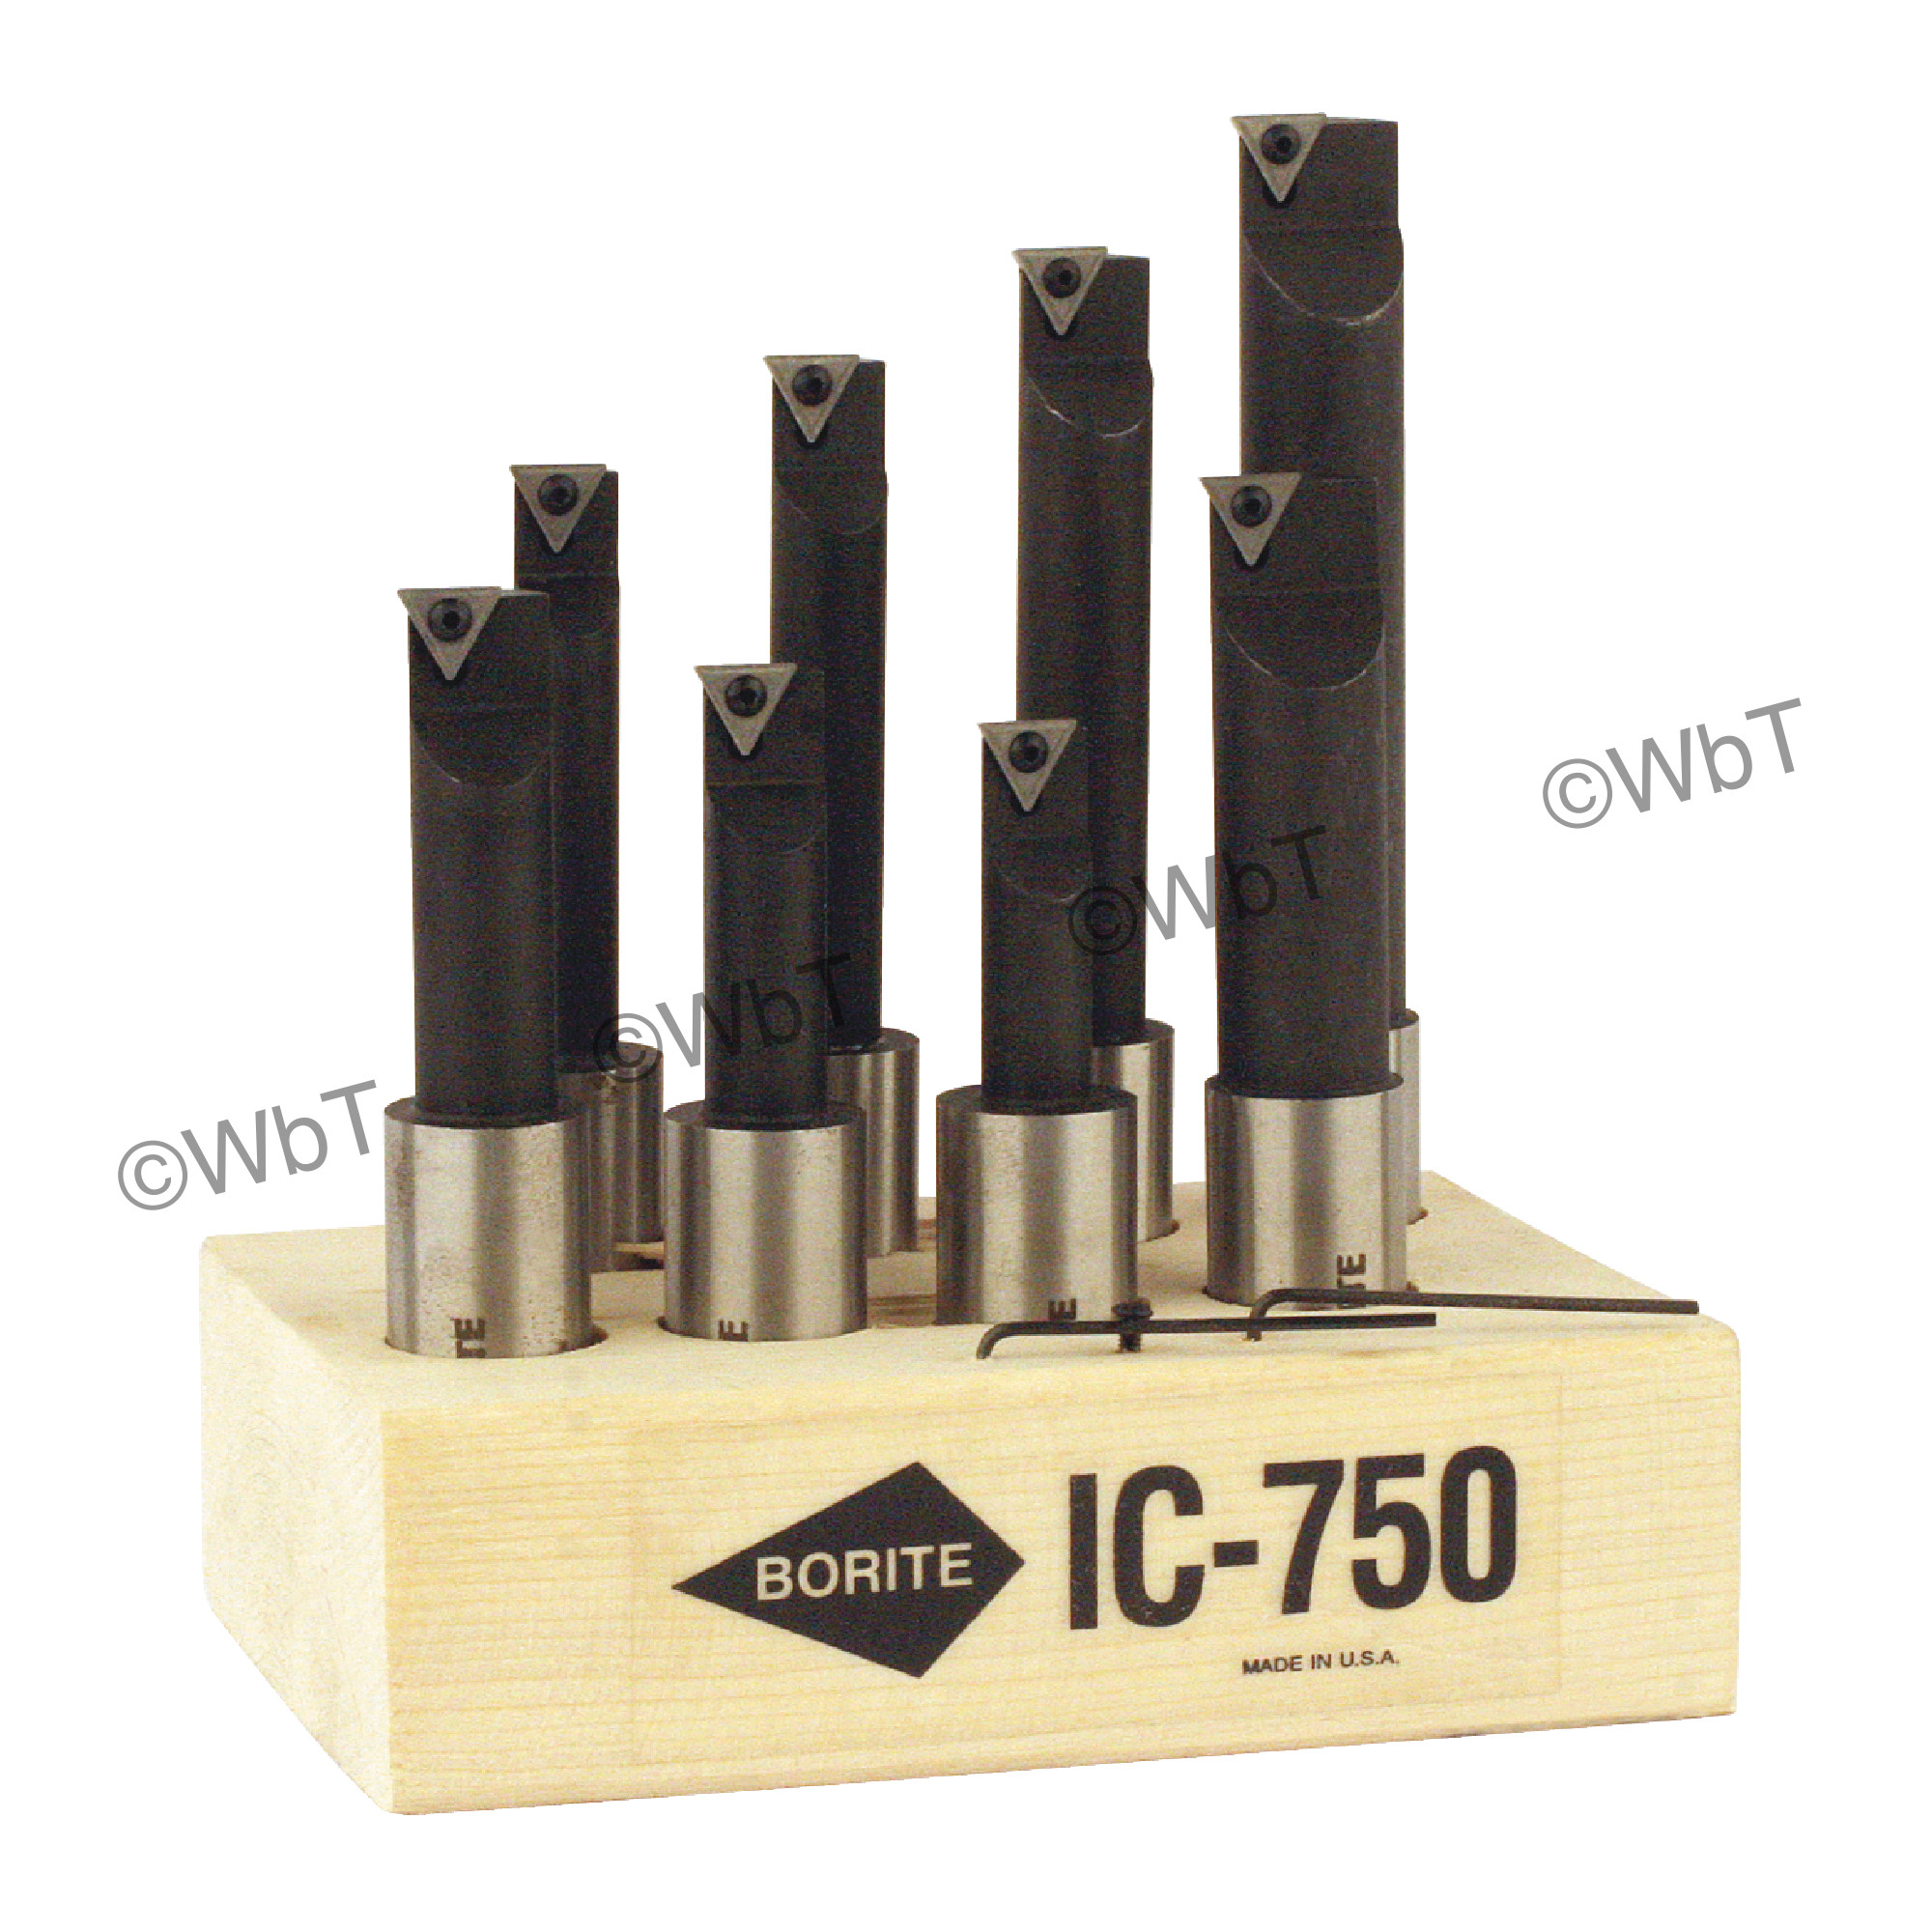 BORITE - IC-750 SET Steel / Boring Bar Set with 8 Different 3/4" With BTT-221 C5 Uncoated Inserts / Right Hand